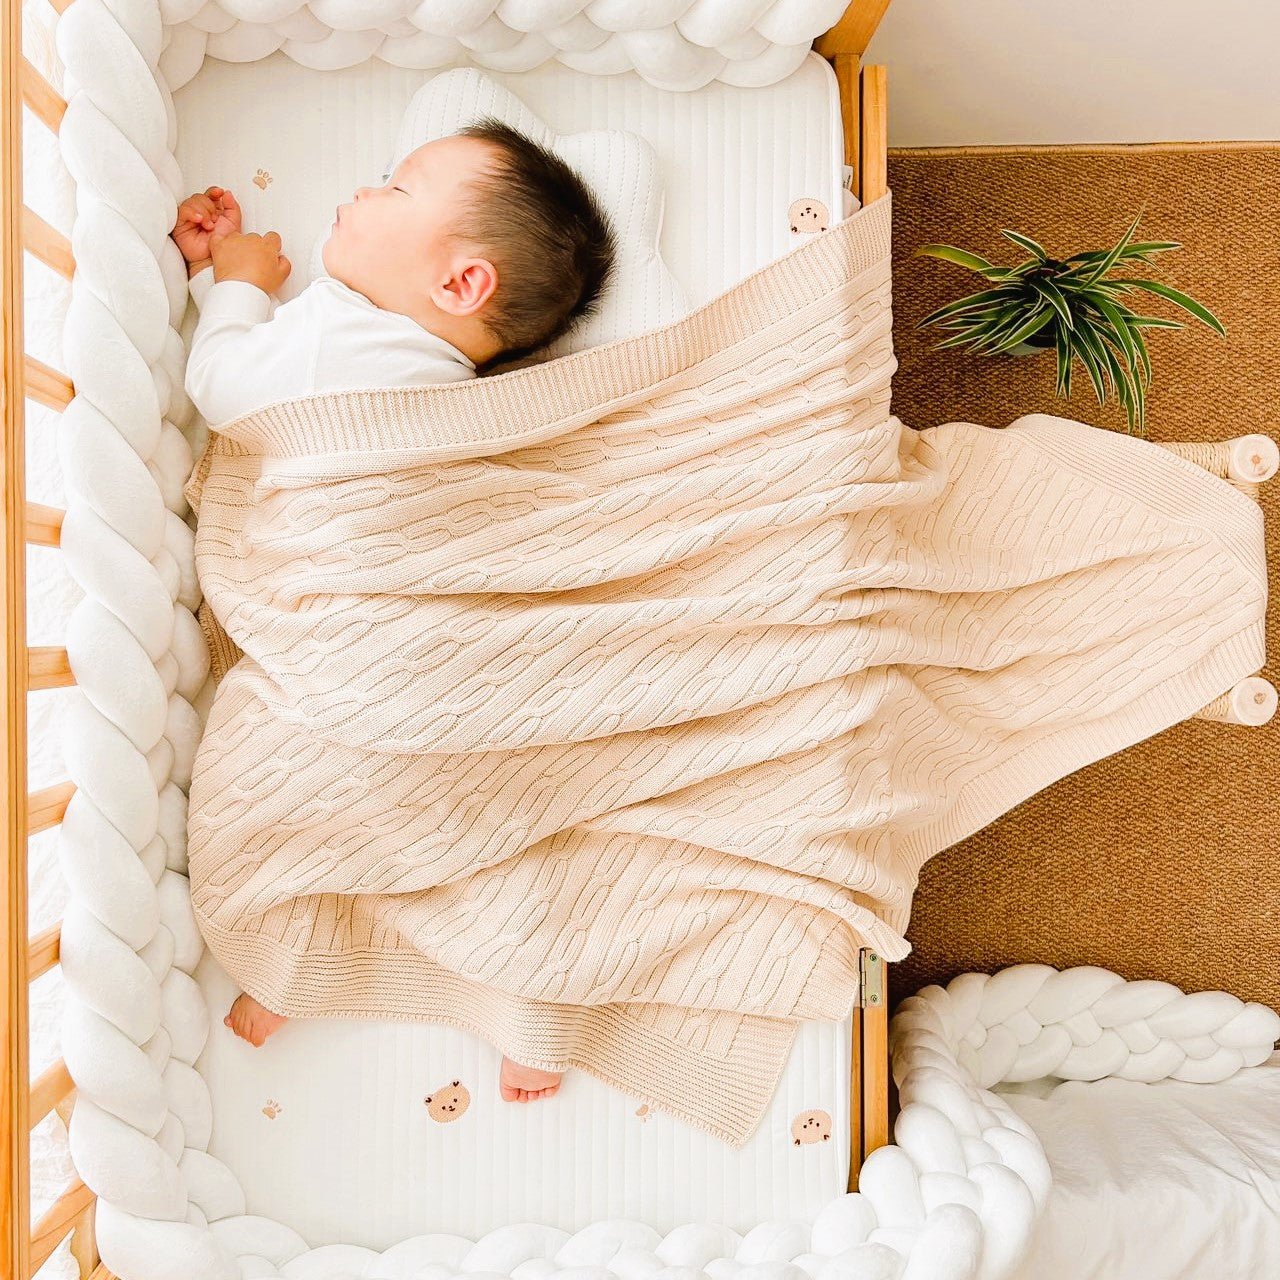 Organic Baby Bedding: Blankets, Quilts & Crib Bumpers